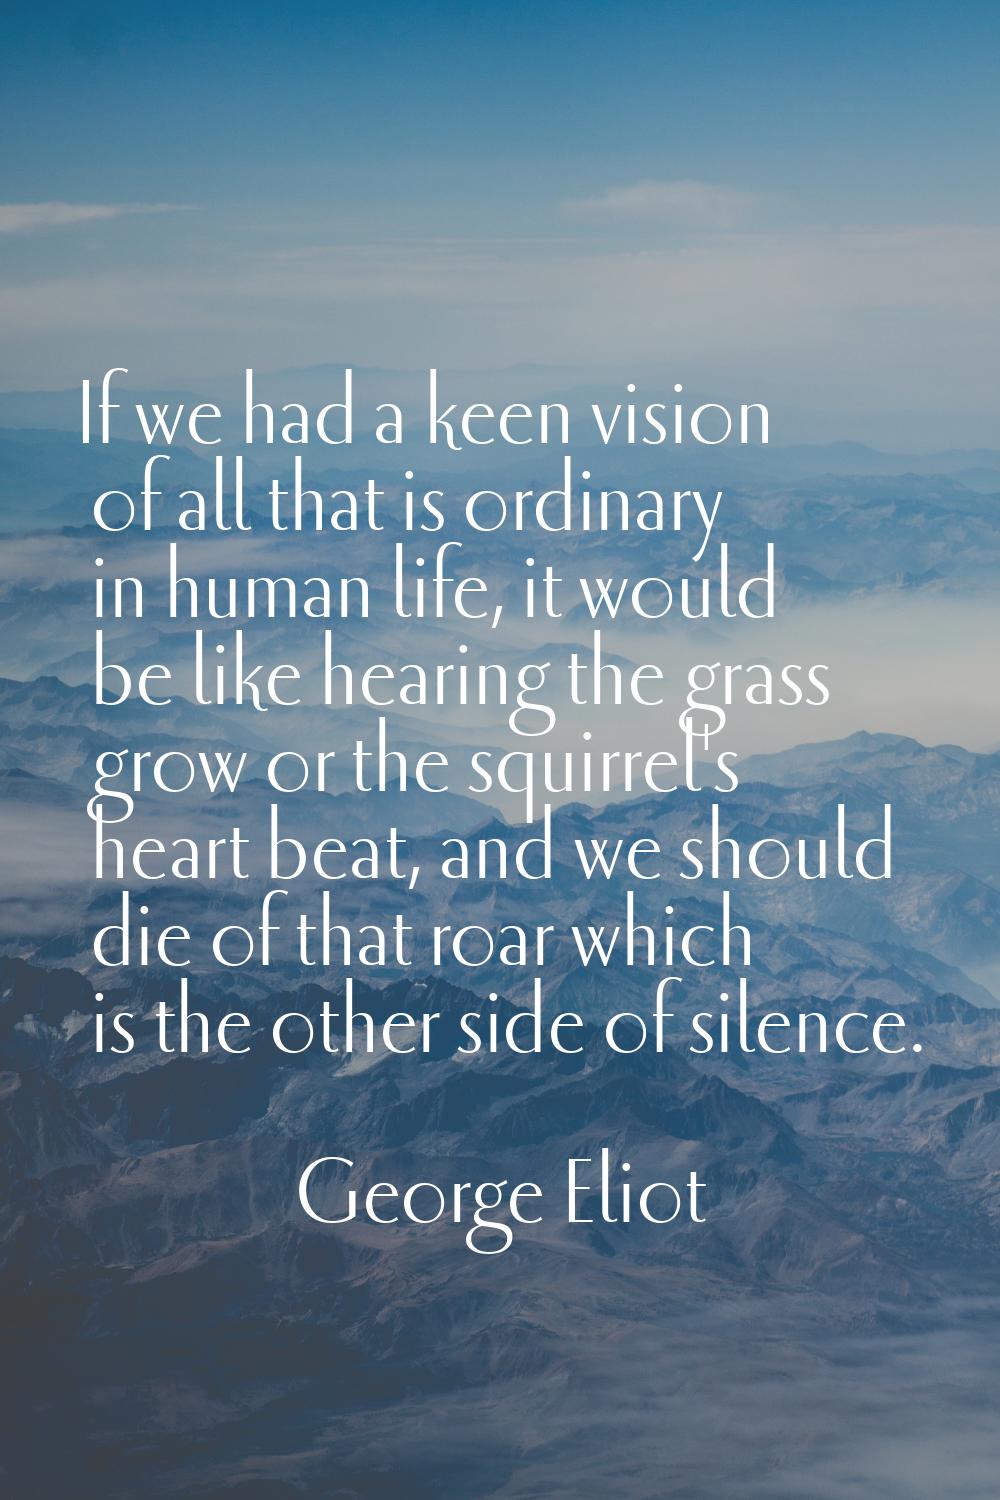 If we had a keen vision of all that is ordinary in human life, it would be like hearing the grass g